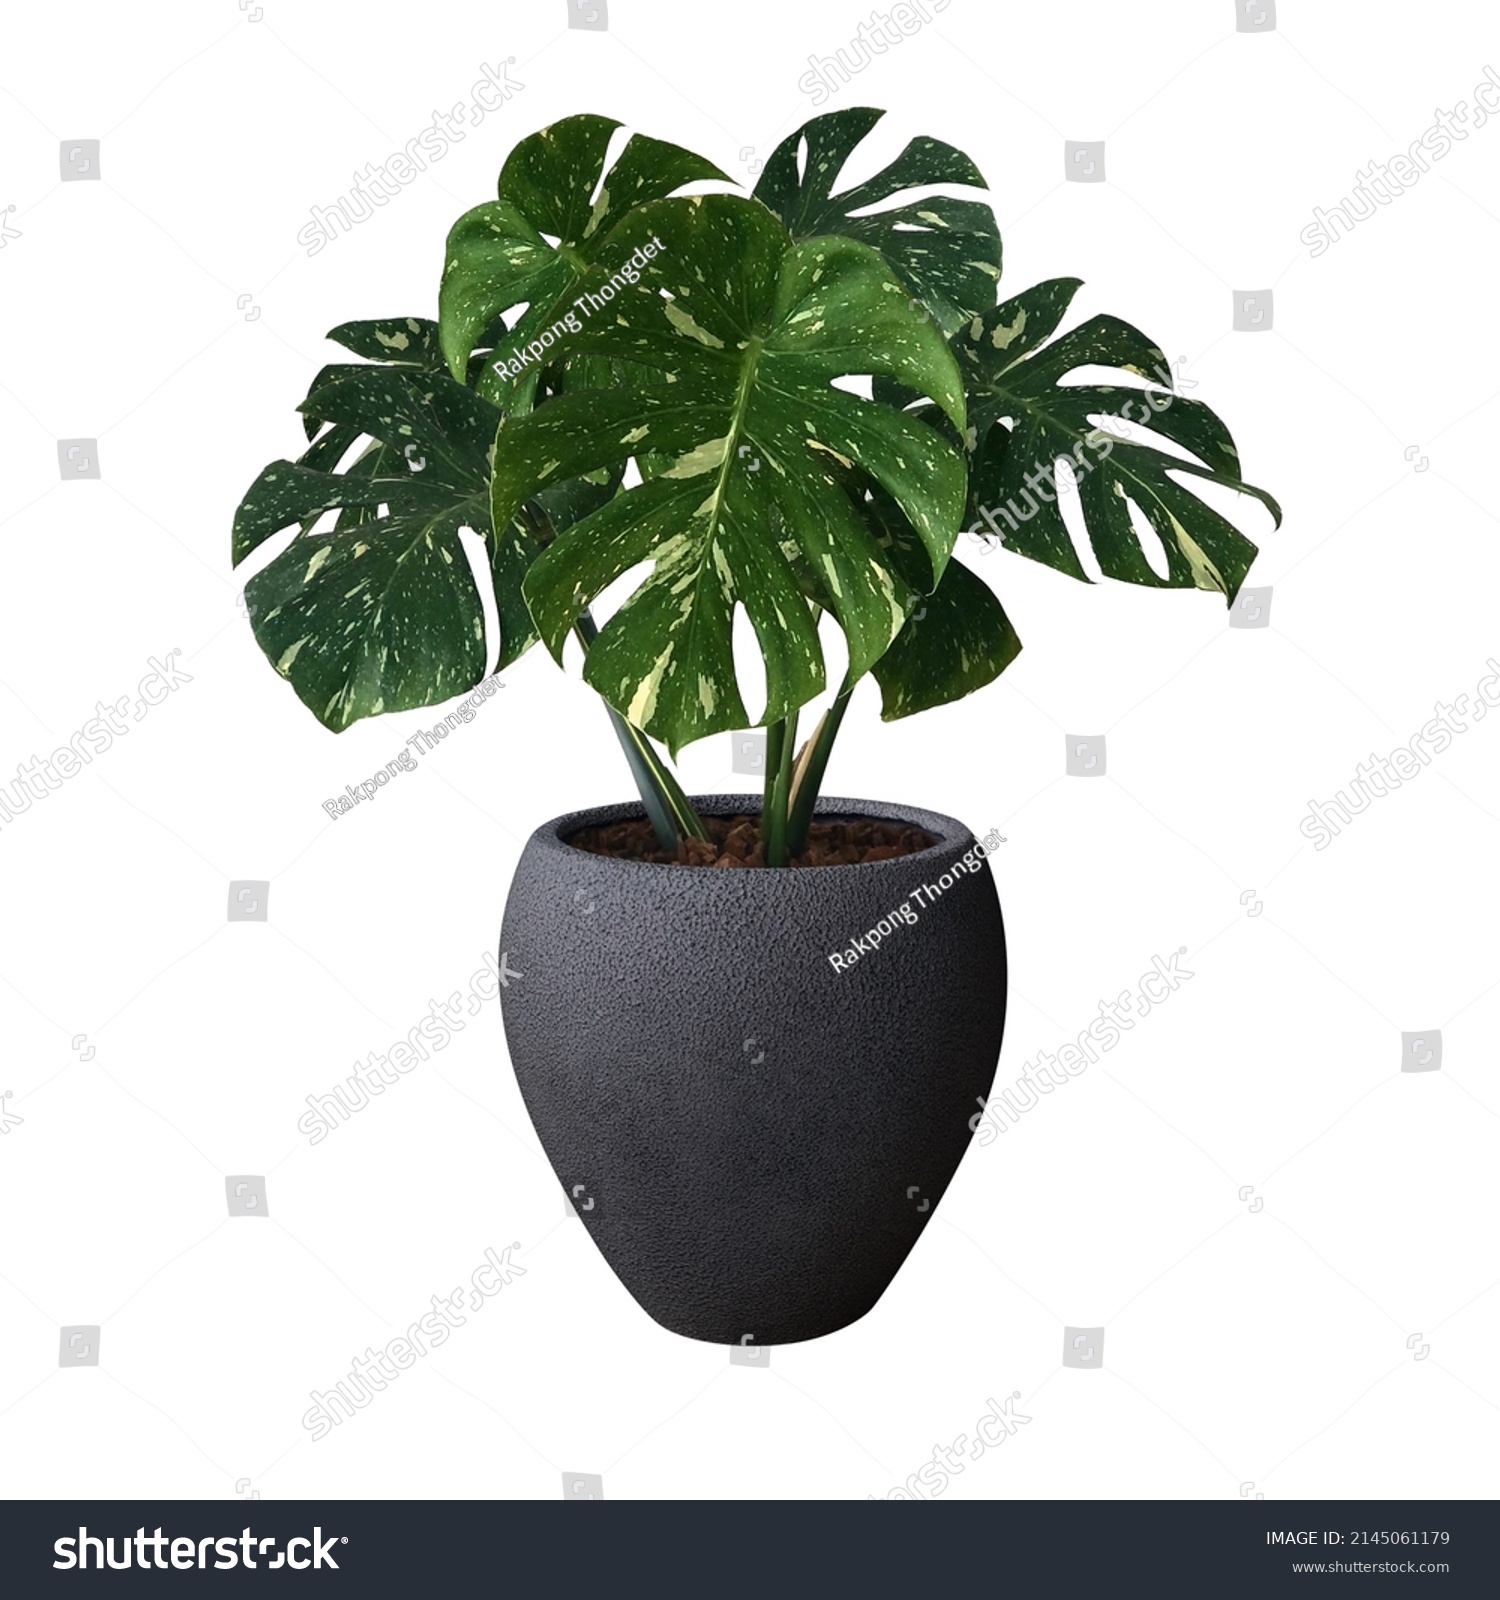 Monstera in a pot black isolated on white background, Close up of tropical leaves or houseplant that grow indoor for decorative purpose.  #2145061179